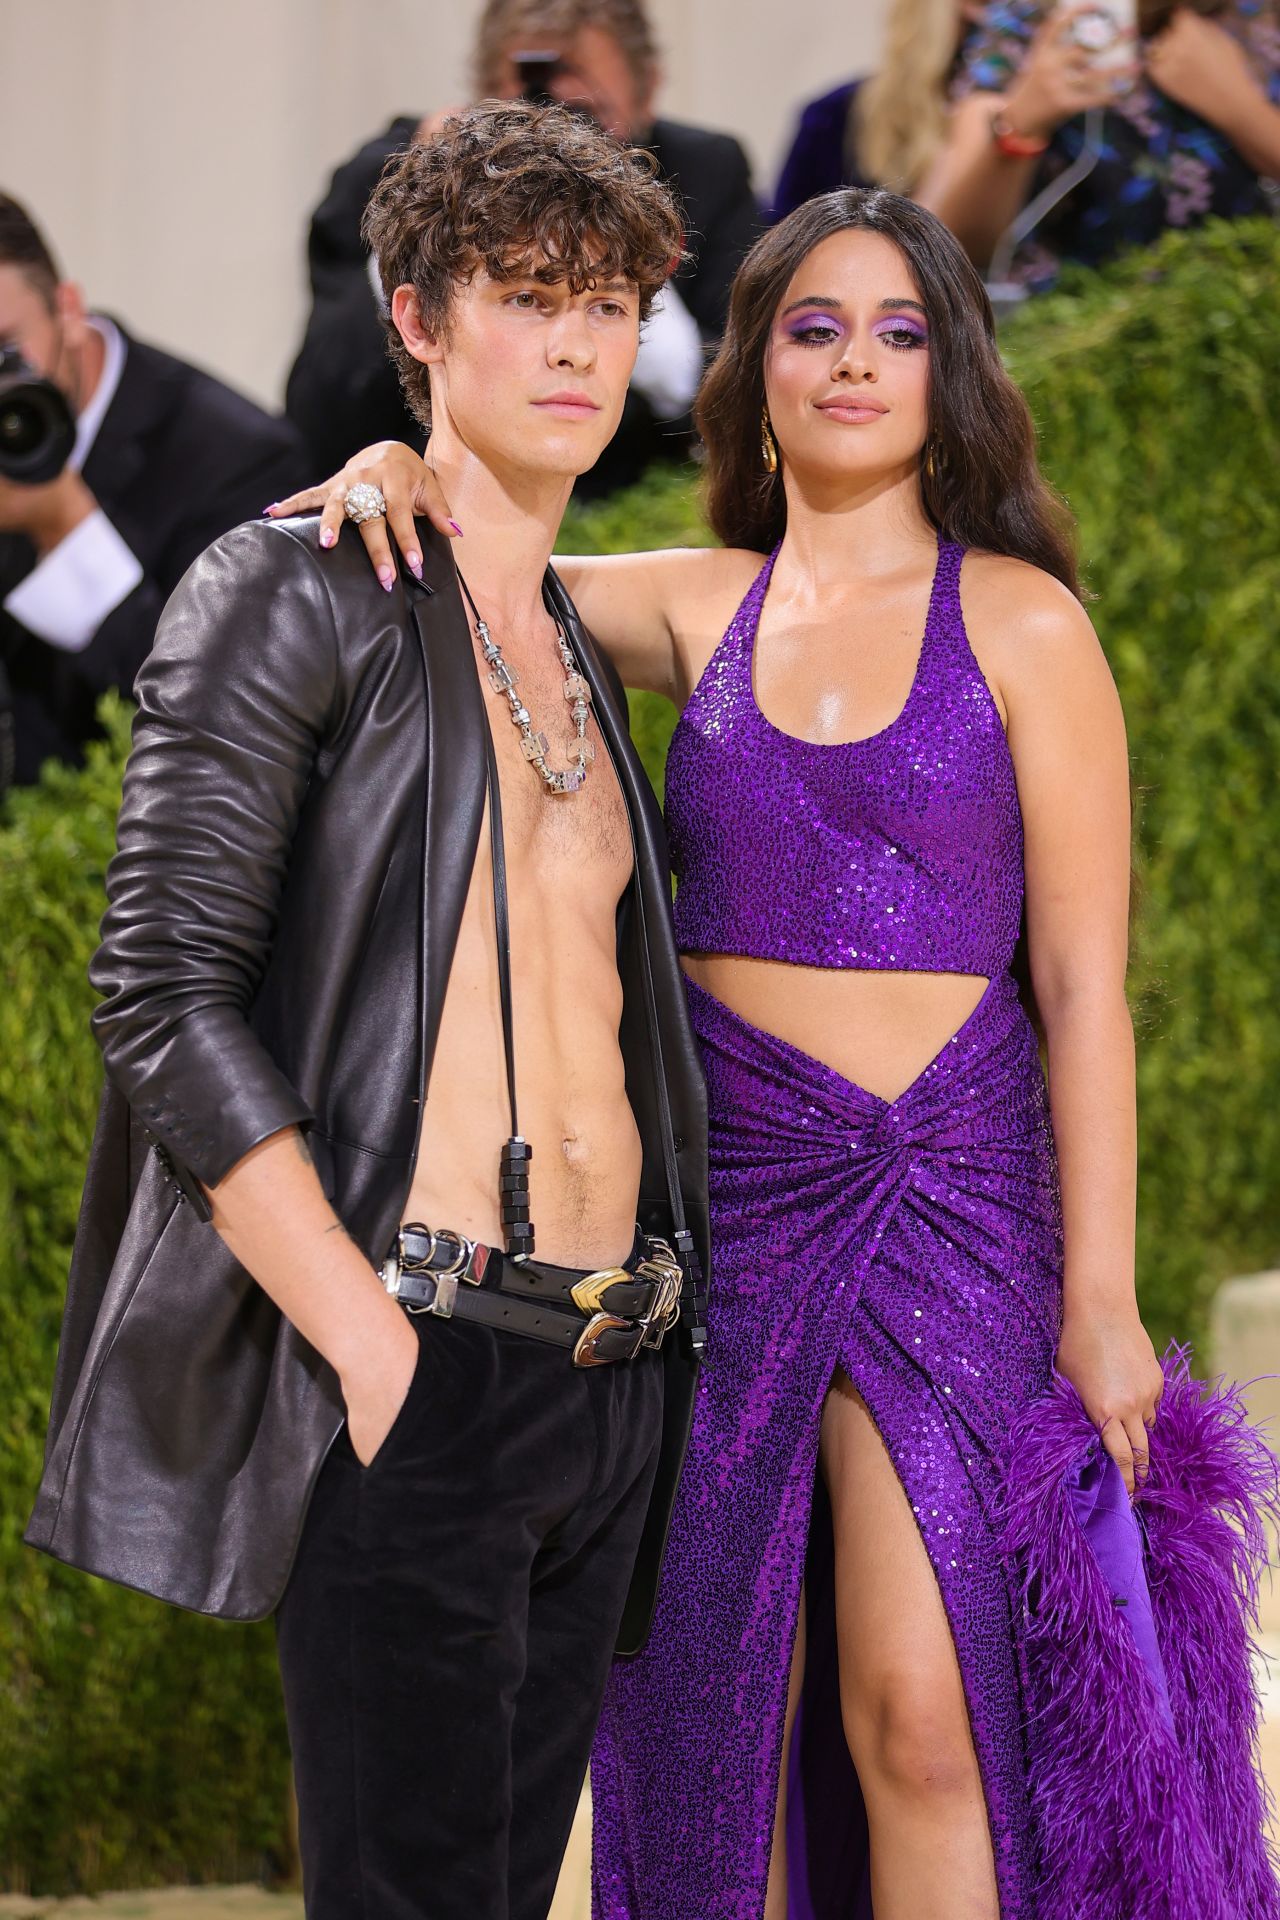 Shawn Mendes and Camilla Cabello arrived together for their Met Gala debut. Mendes went bare-chested under a leather jacket, while Cabello wore a sequined purple cut-out gown.